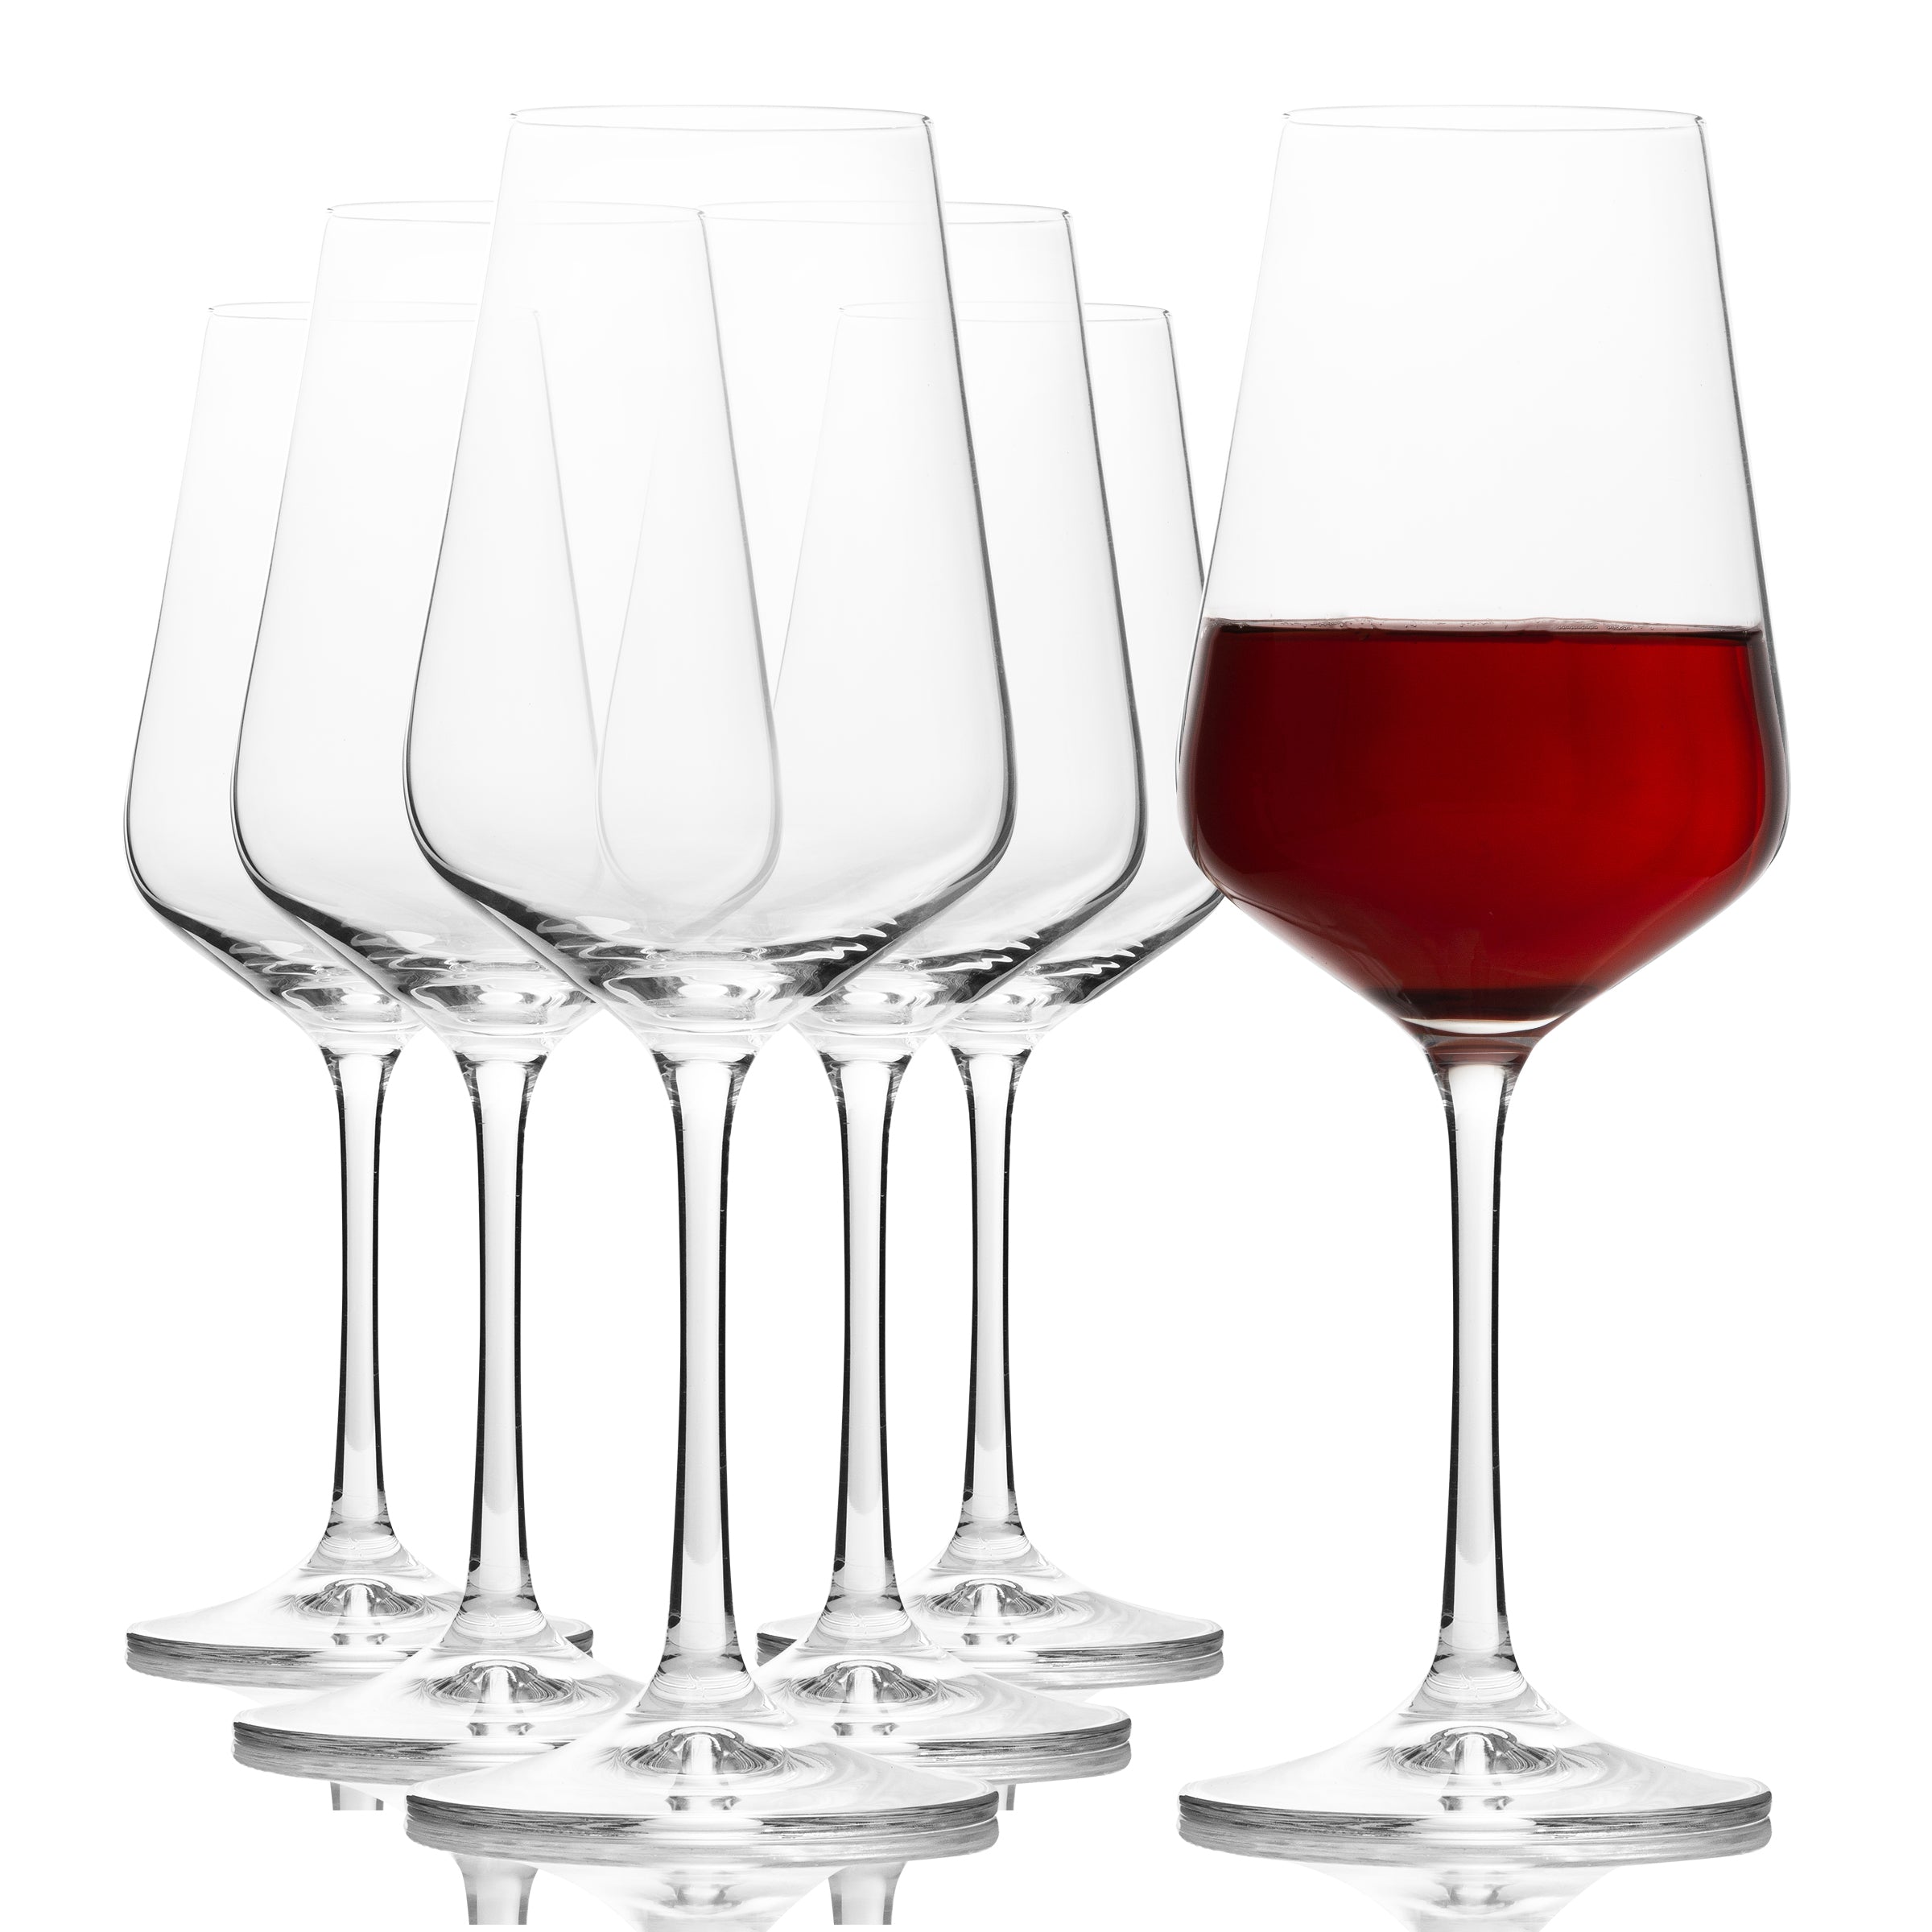 Pantry Red Wine Glasses - Set of 6